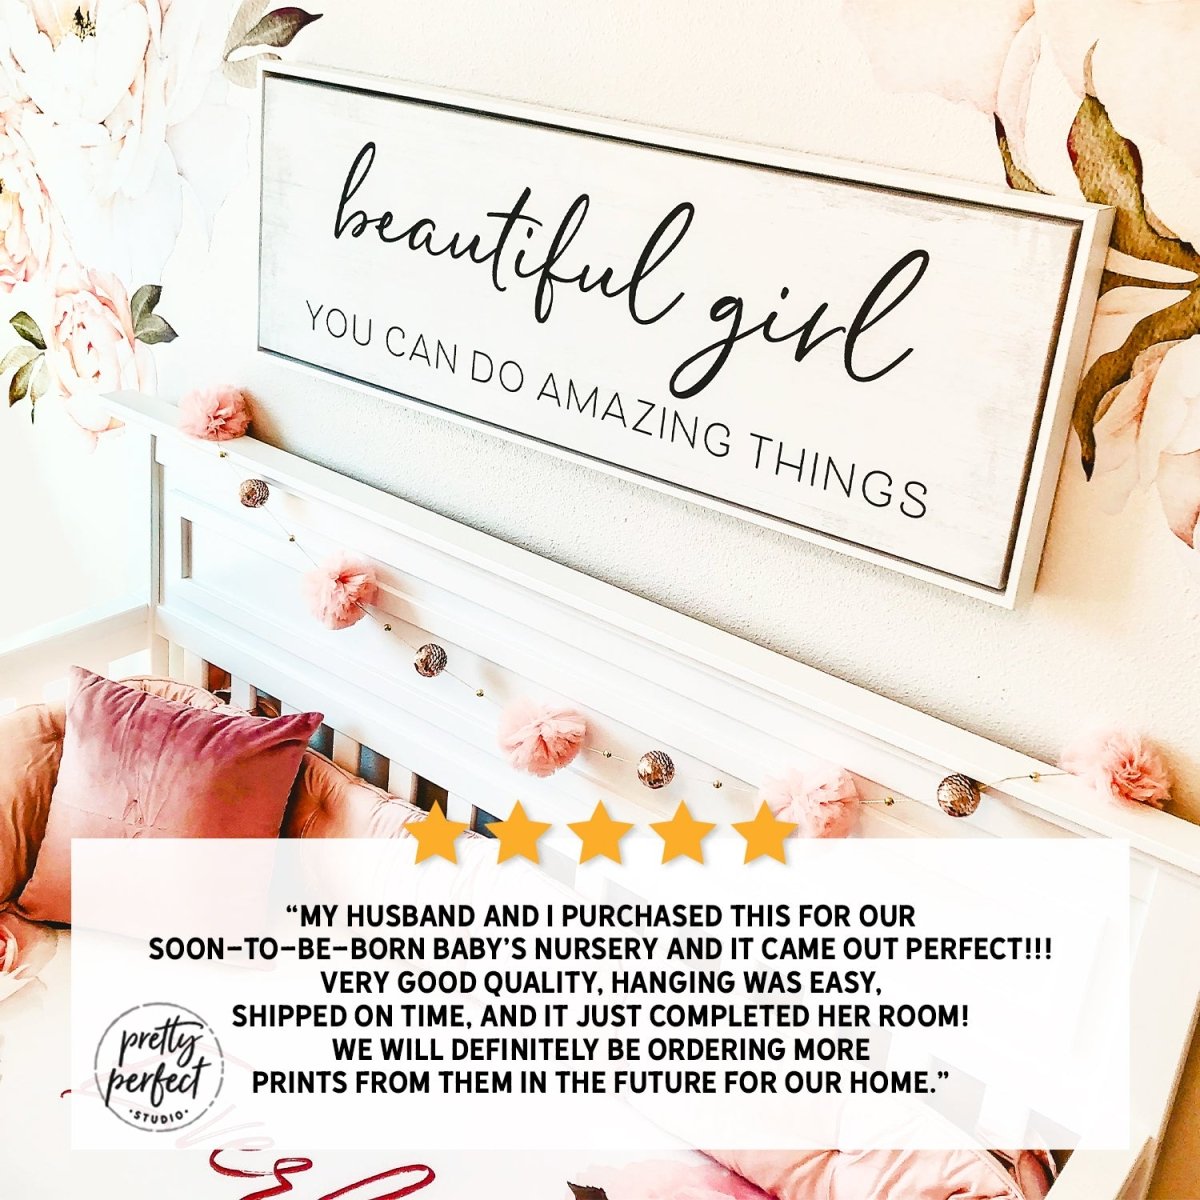 Customer product review for beautiful girl you can do amazing things wall art by Pretty Perfect Studio